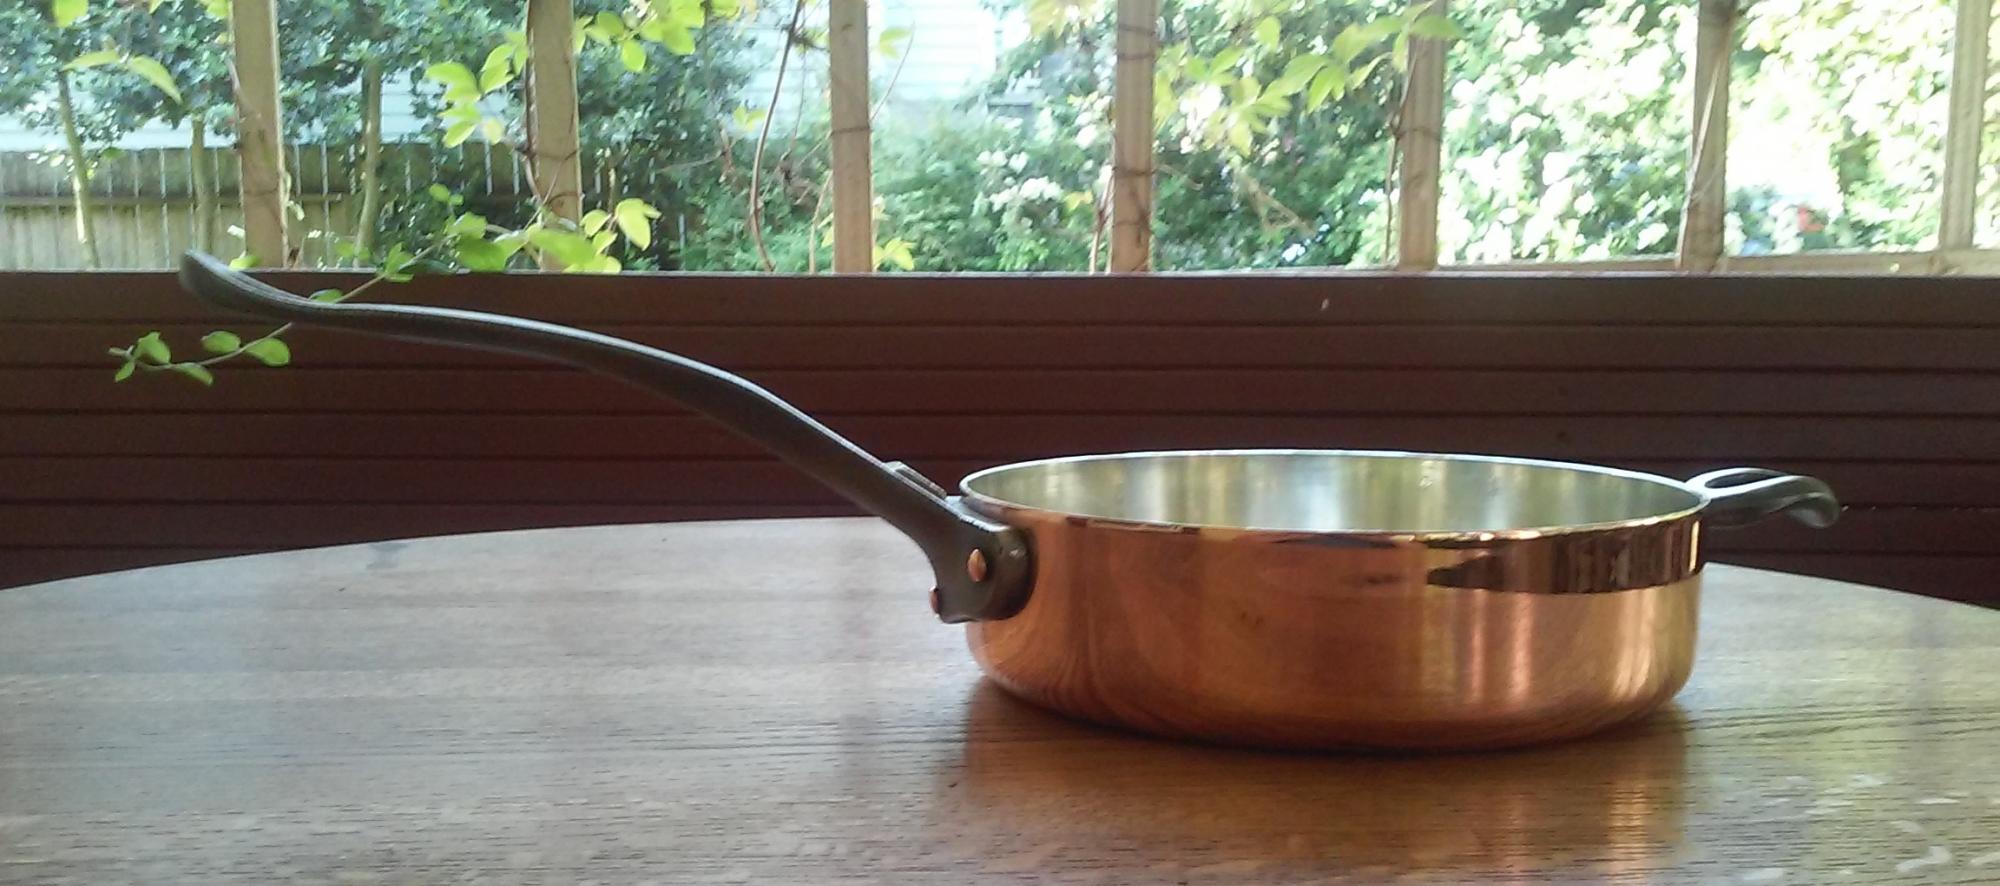 New saucepans from Brooklyn Copper Cookware - Cookware - Hungry Onion